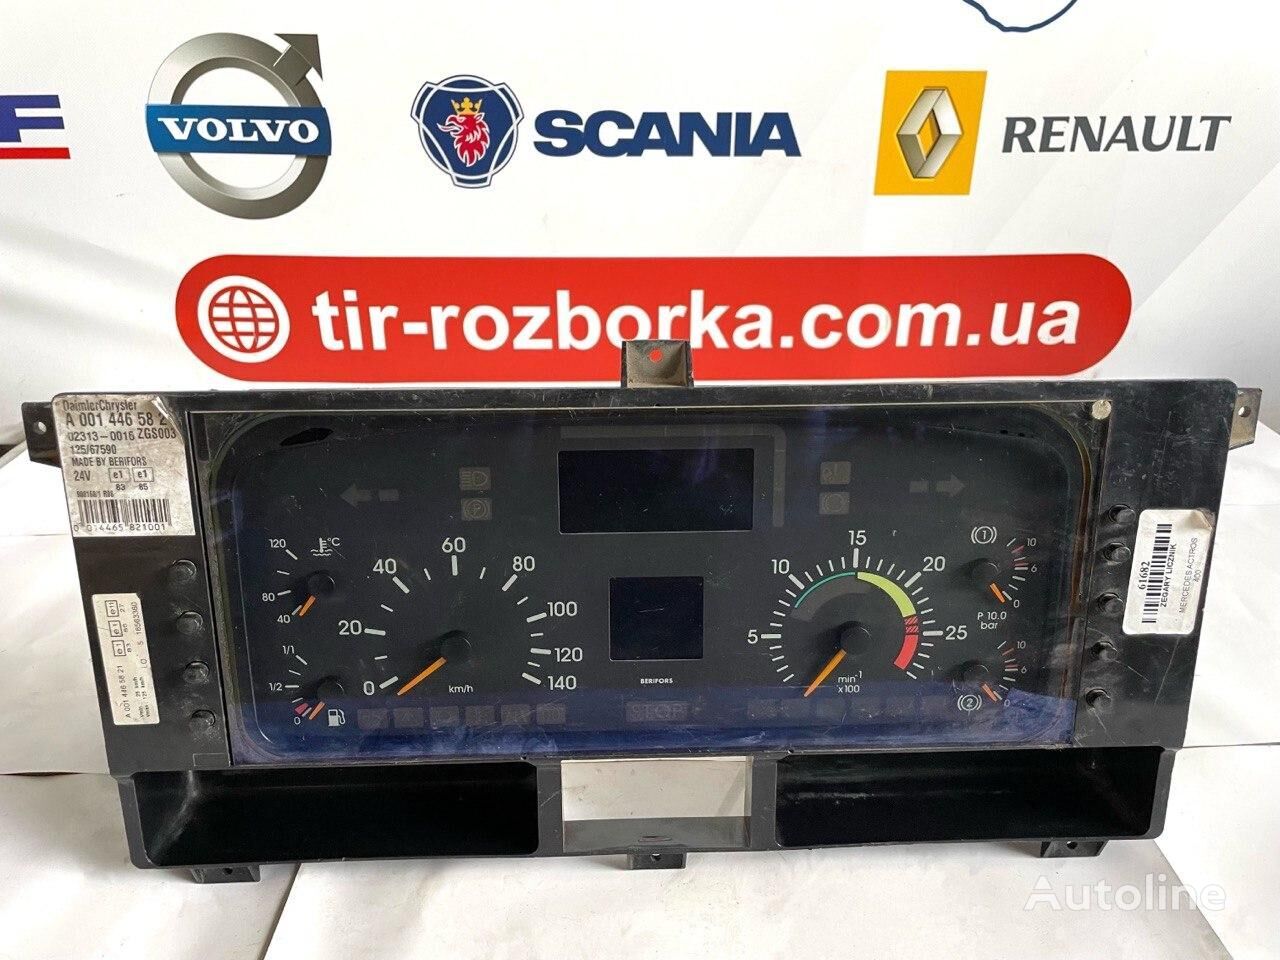 Mercedes-Benz Actros 0014465821 dashboard for truck tractor